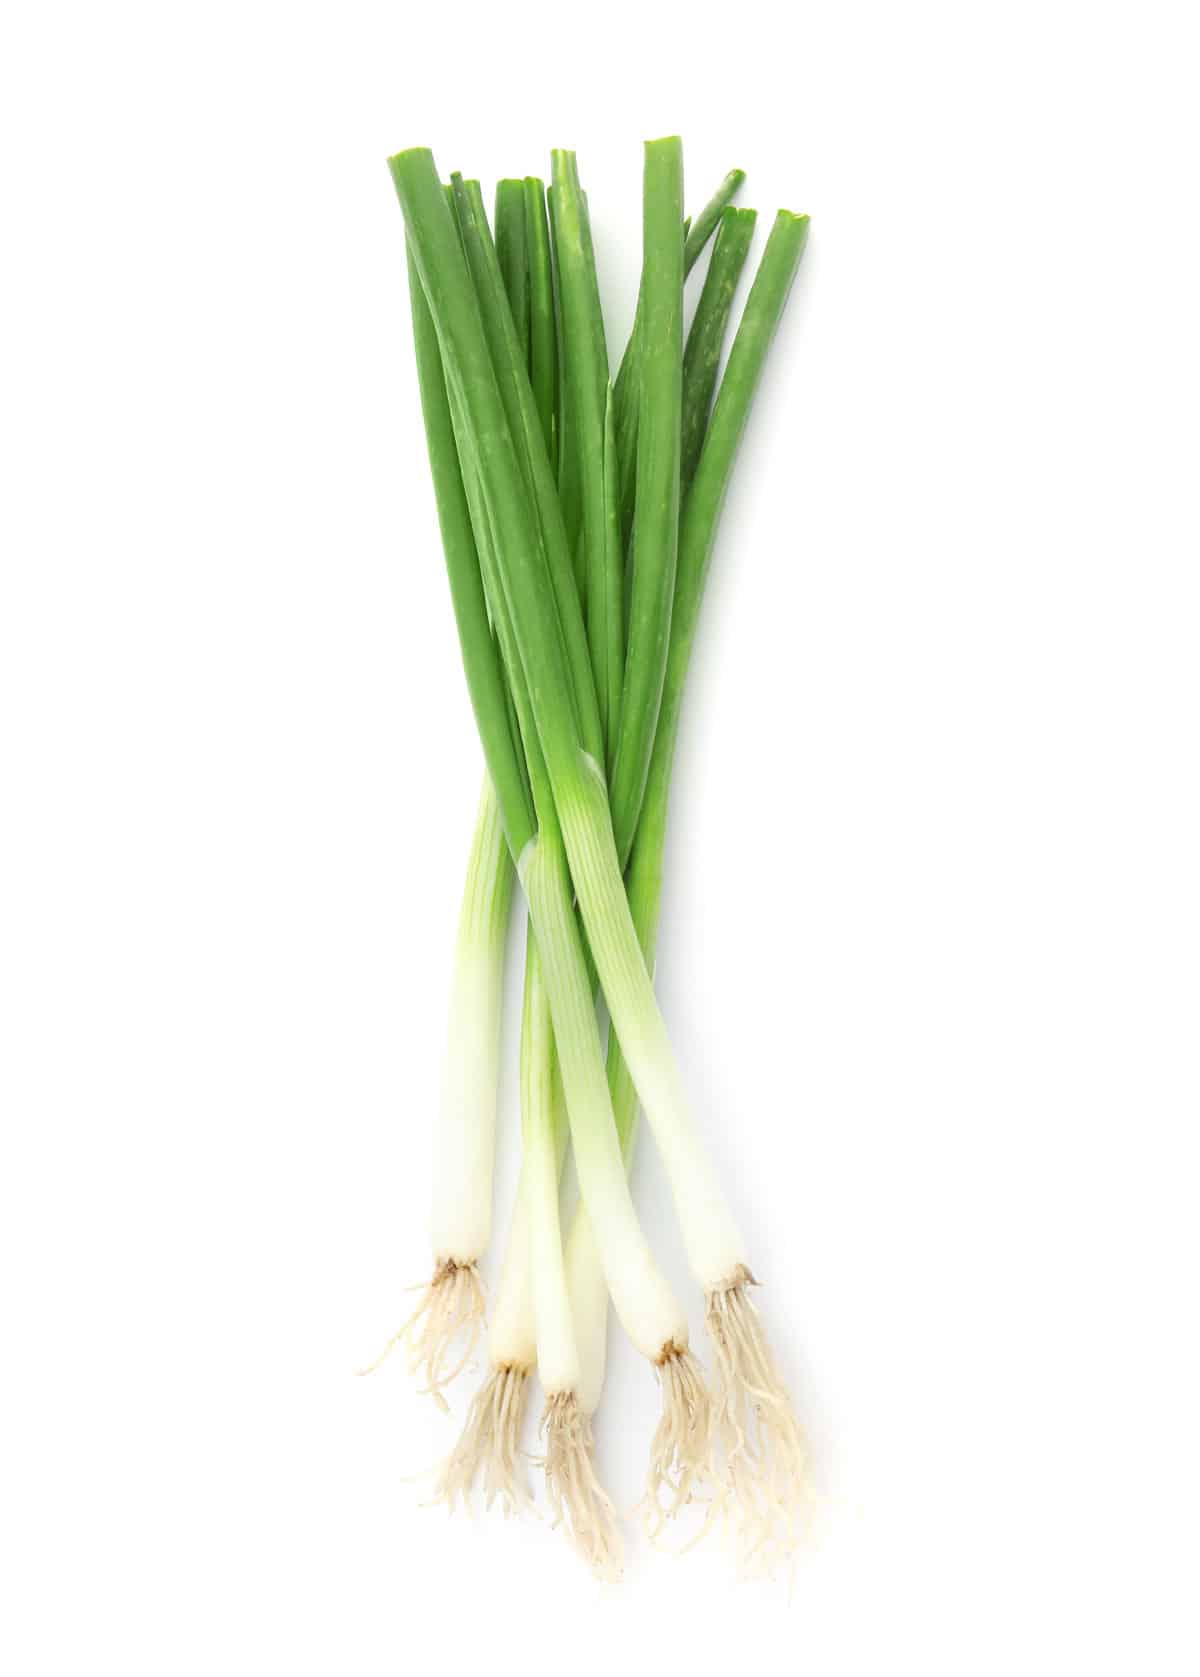 Green onions on white.